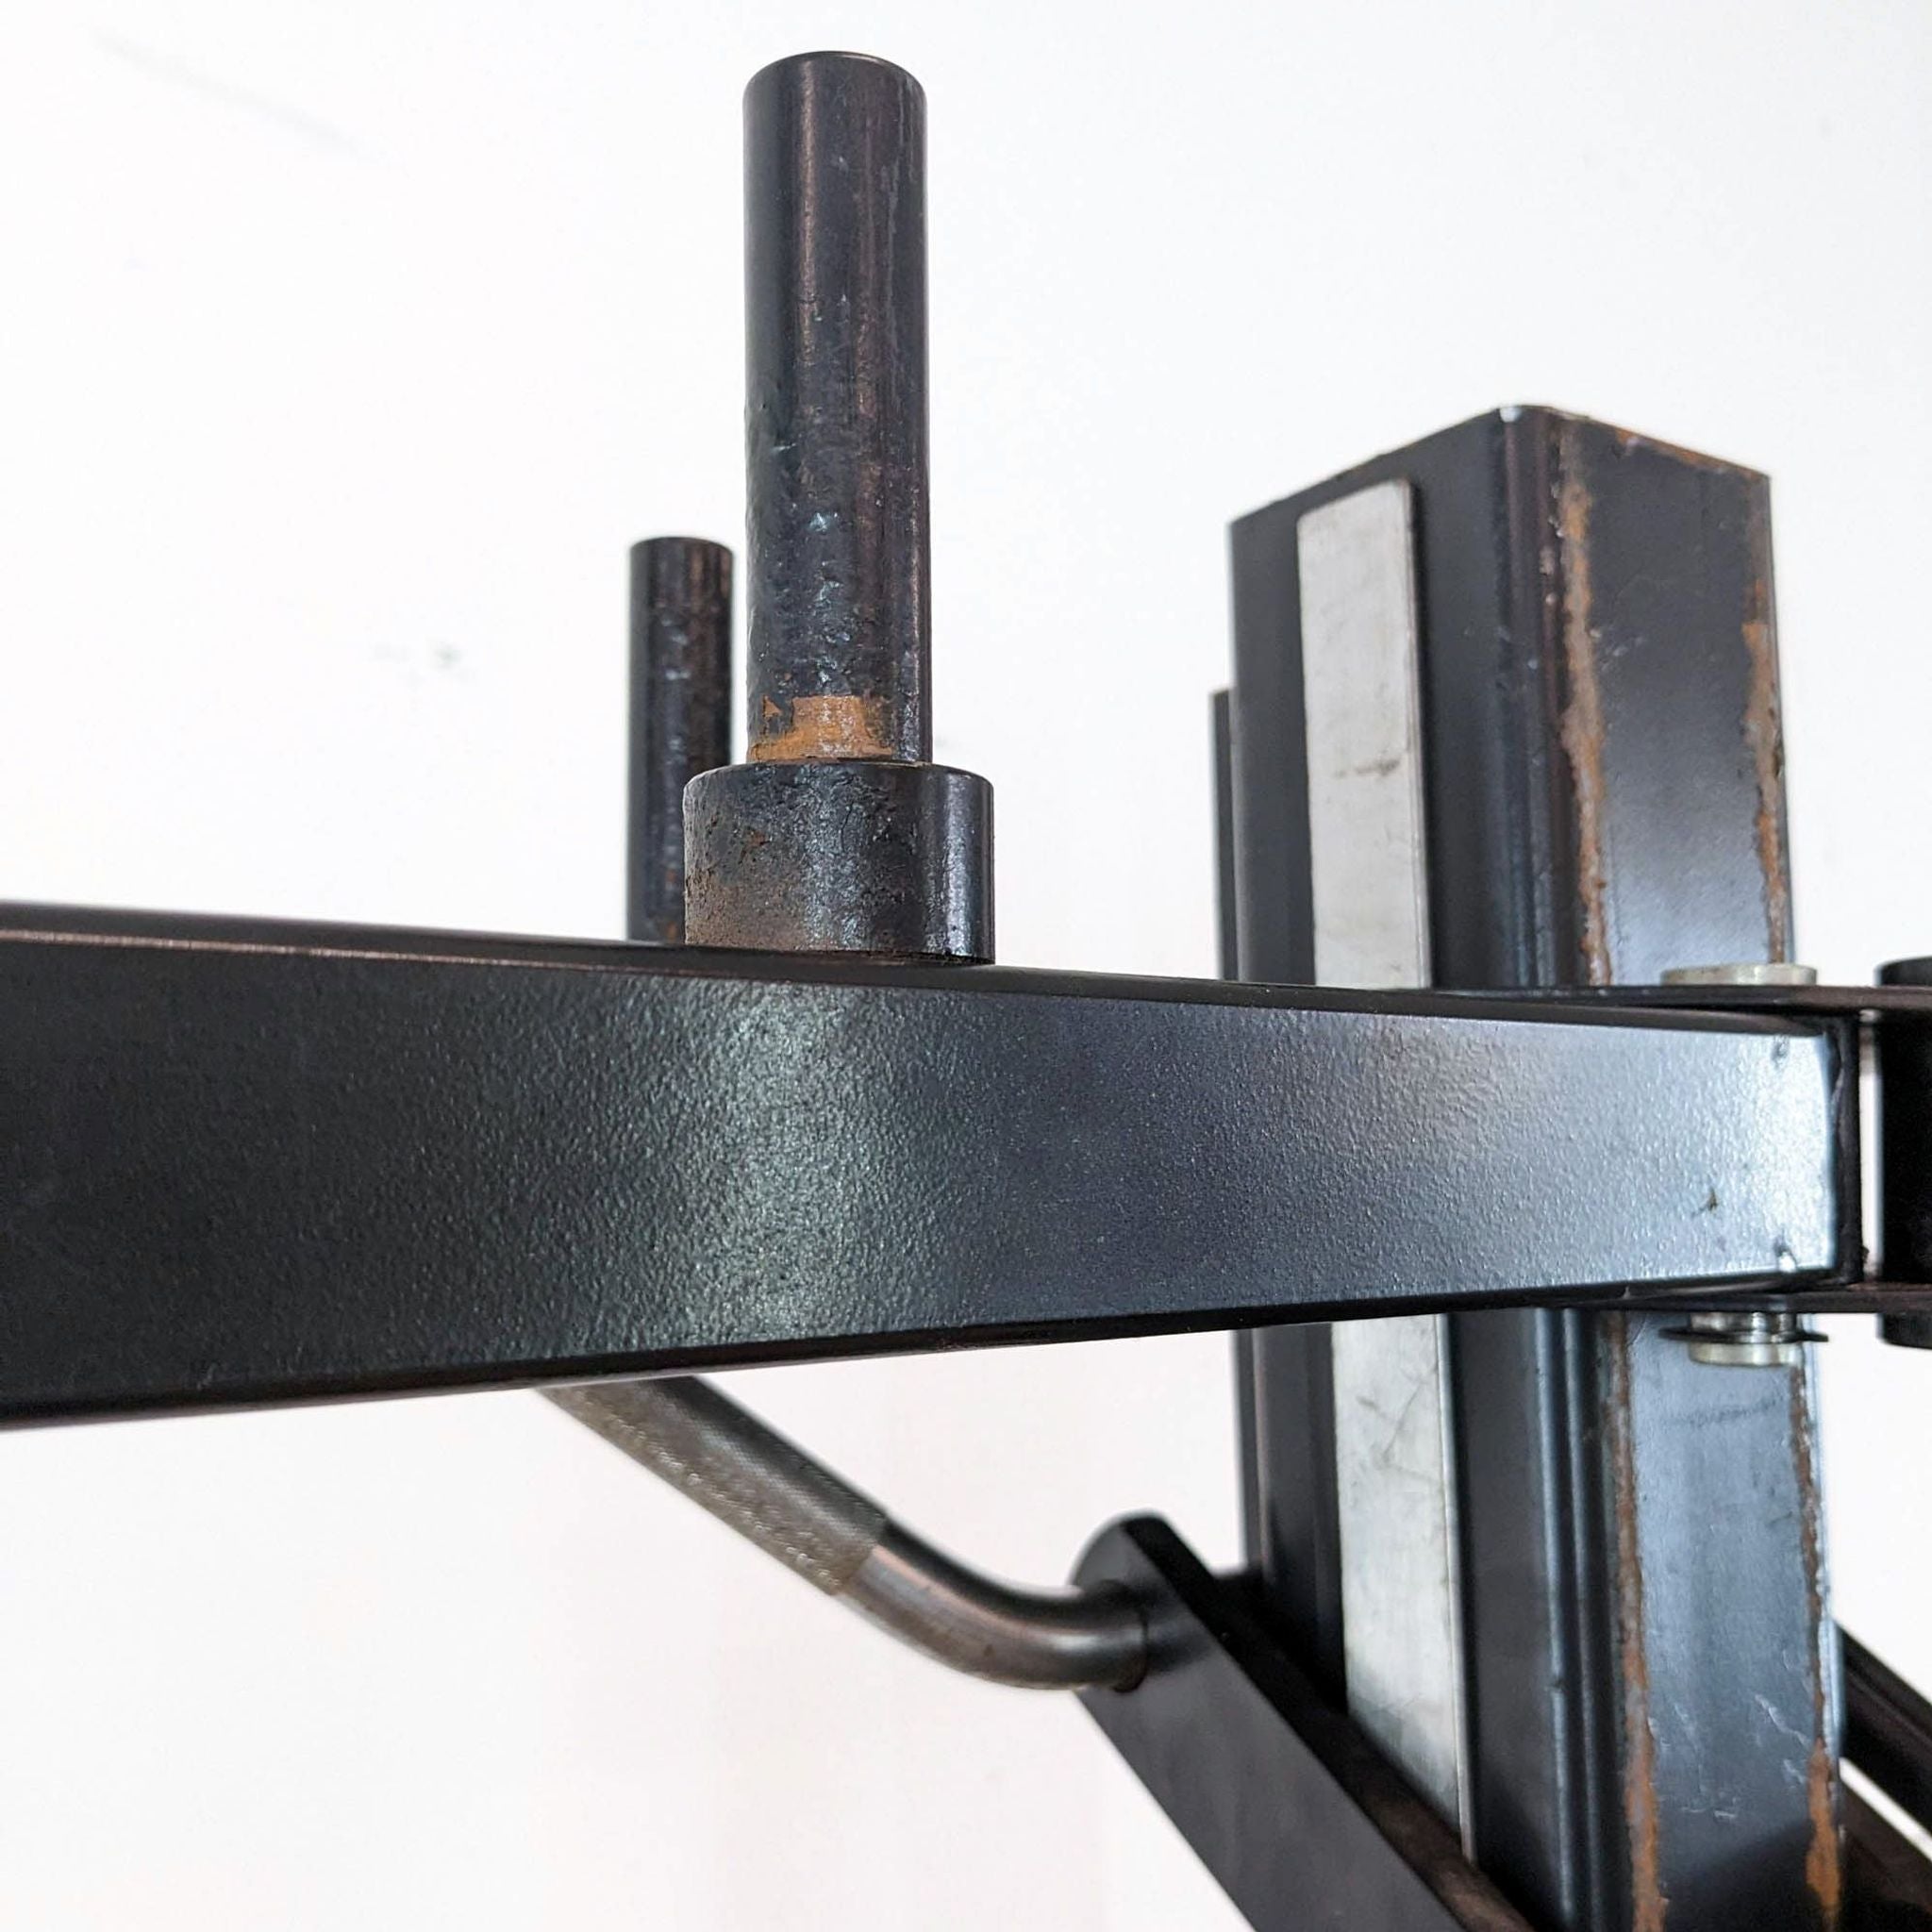 Alt text 2: Close-up of a Soloflex gym equipment's resistance arm and weight pegs showing signs of use.